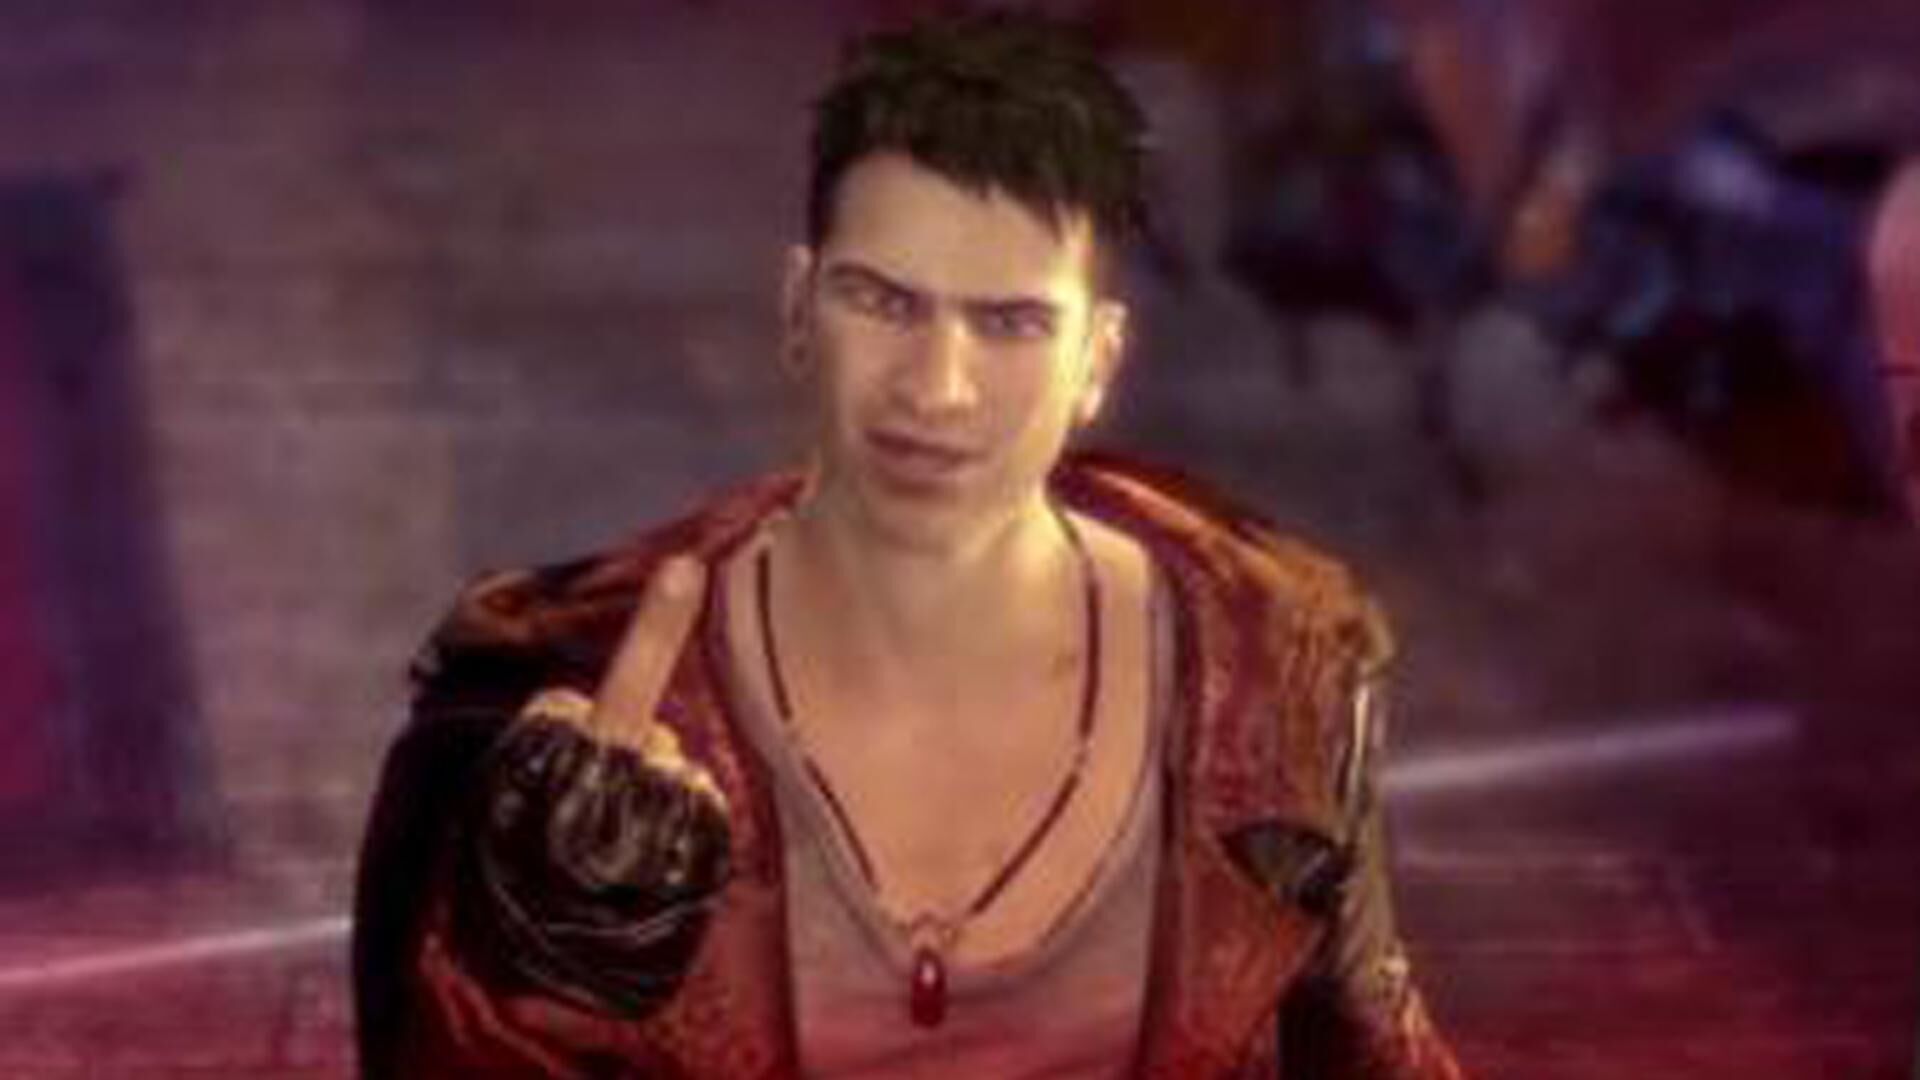 Devil May Cry (video game), Ultimate Pop Culture Wiki